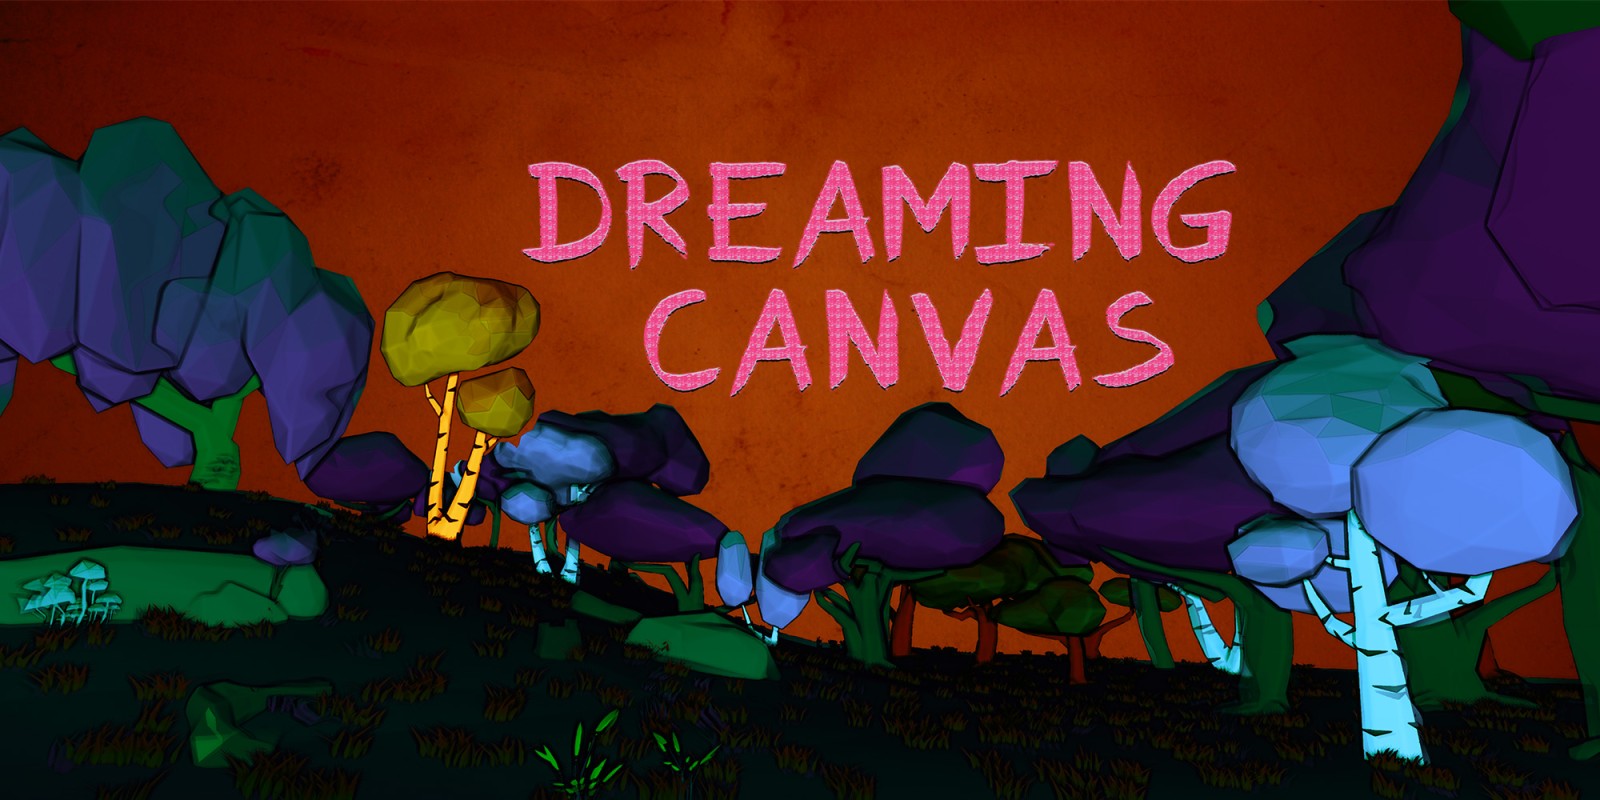 Dreaming Canvas